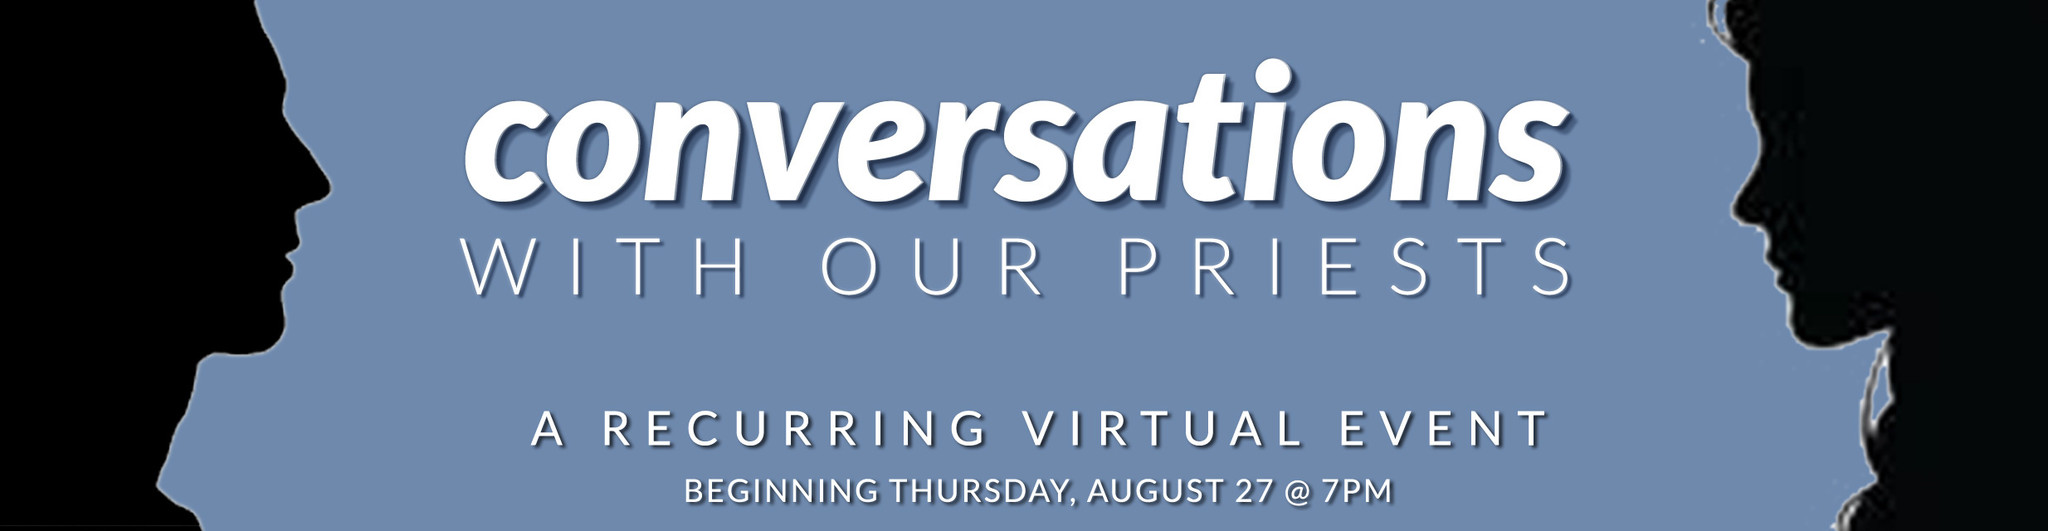 Conversations With Our Priests Virtual Event Series